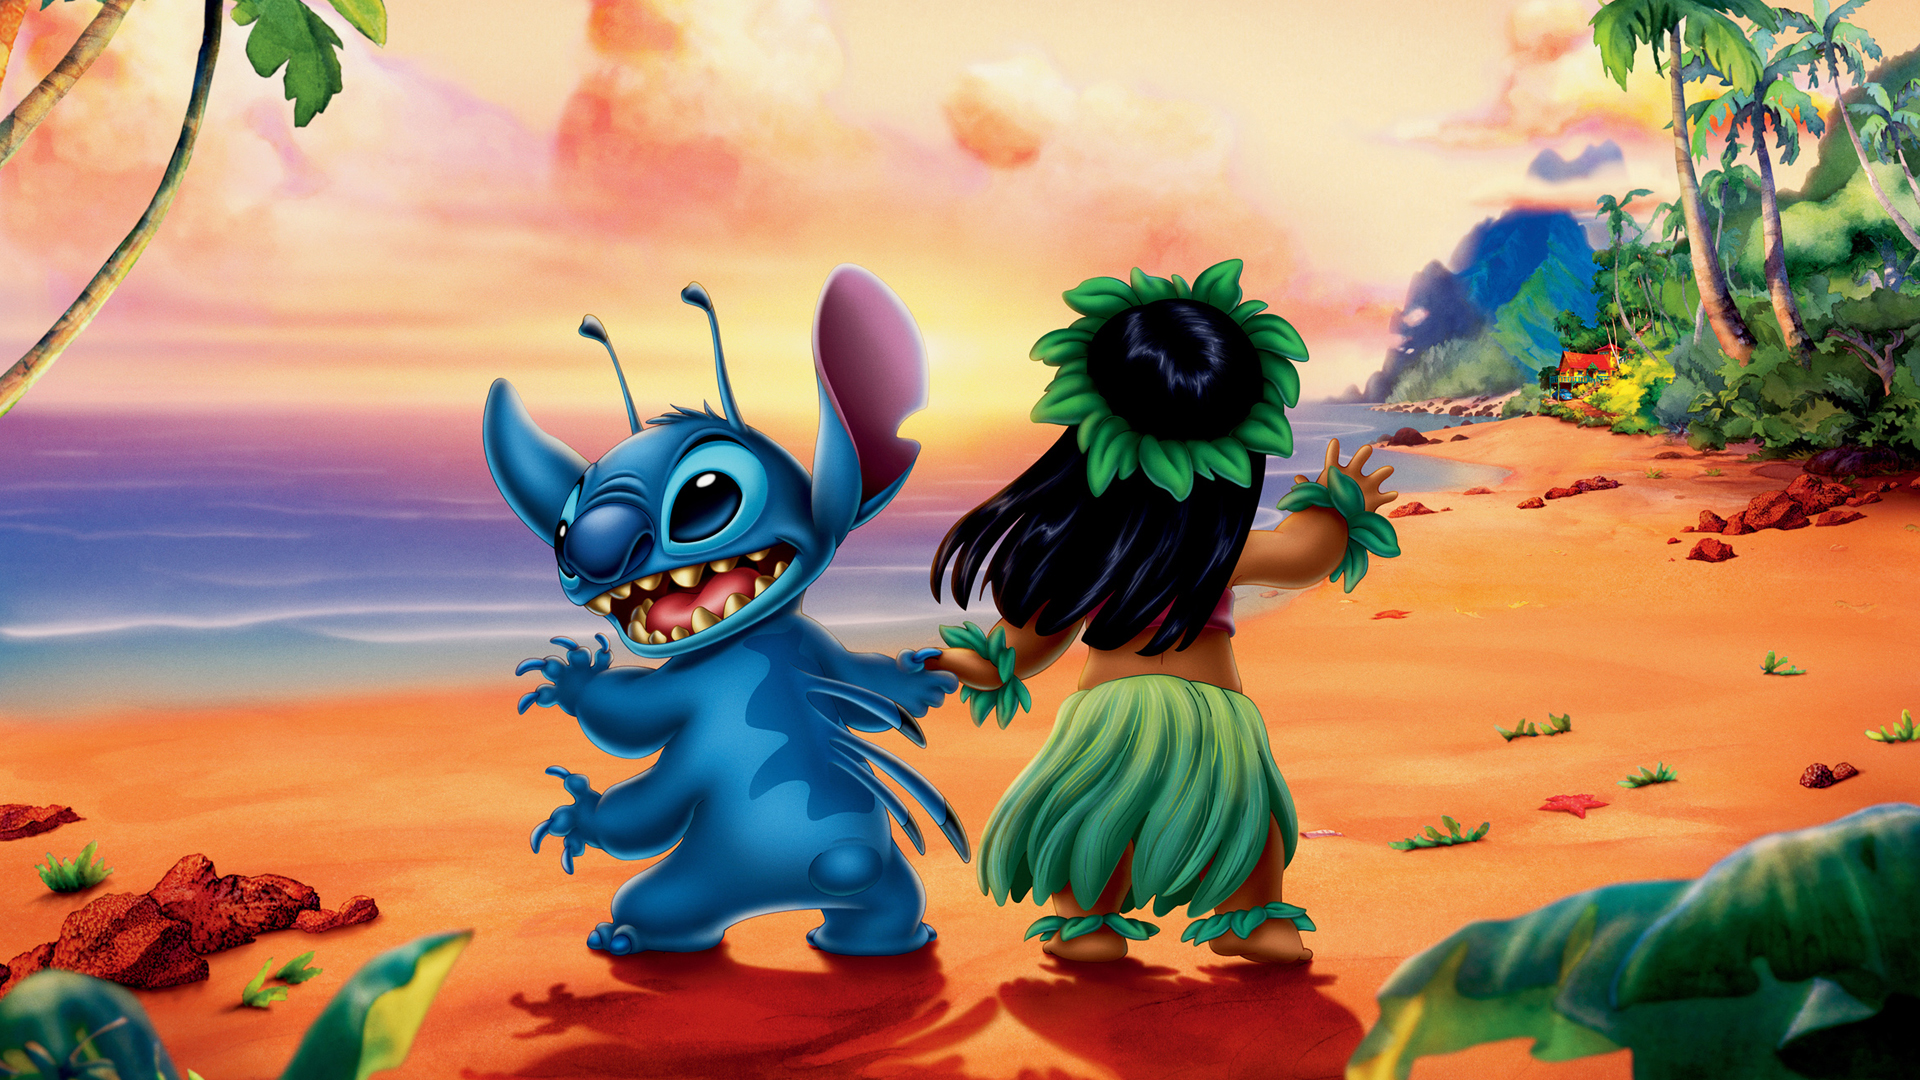 Stitch Wallpapers HD | Wallpapers, Backgrounds, Images, Art Photos.